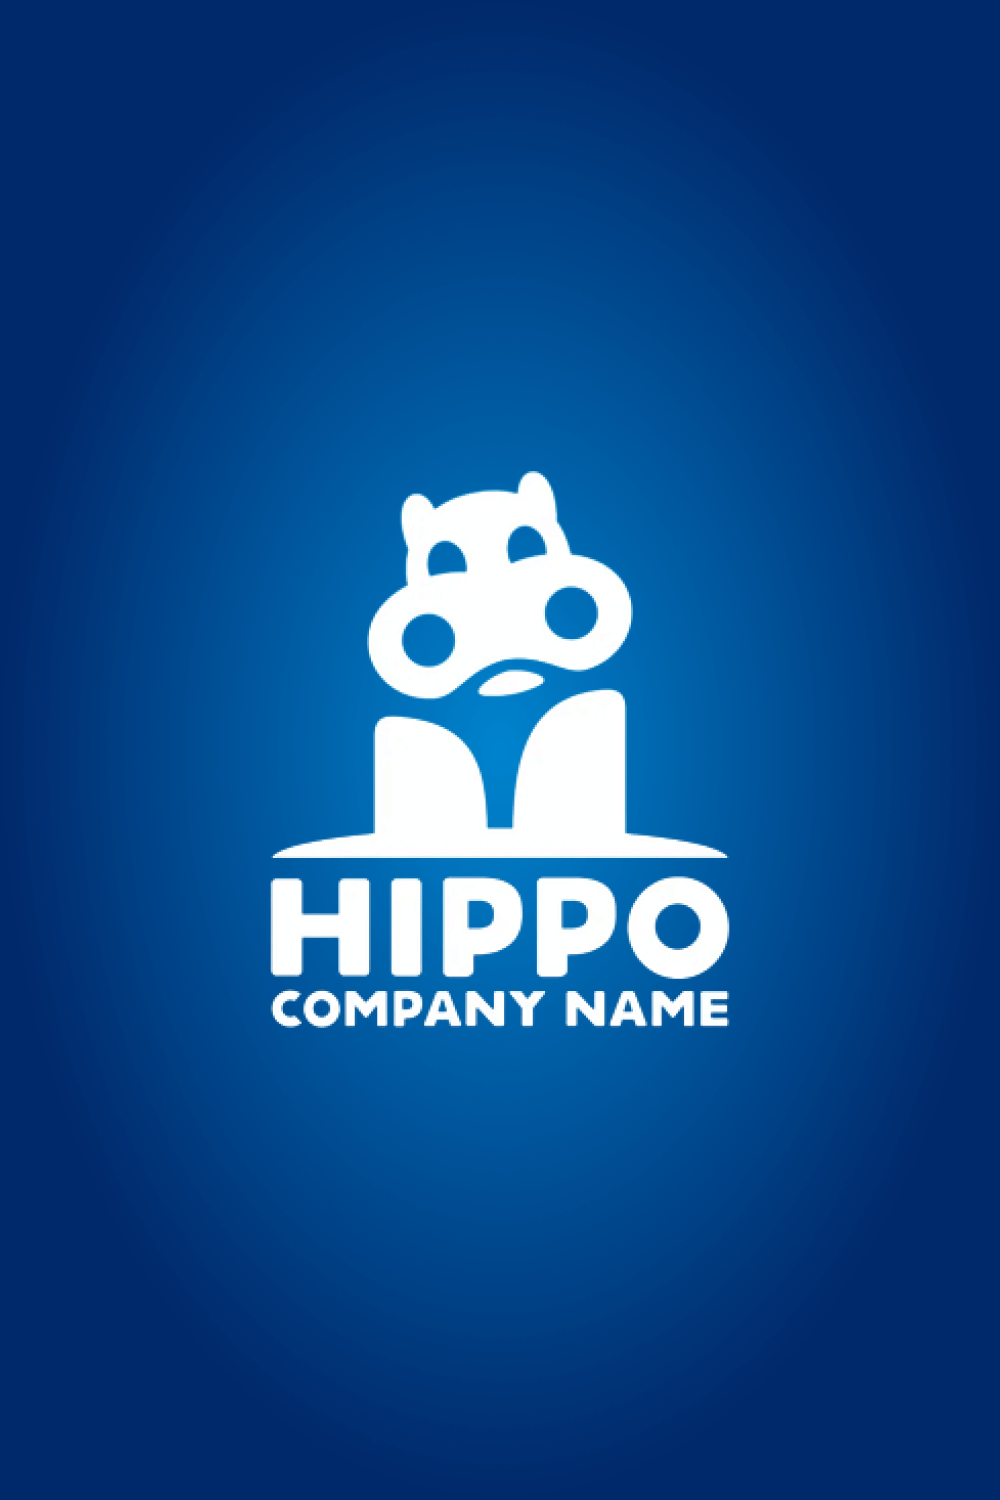 Hippos on the logo of species.